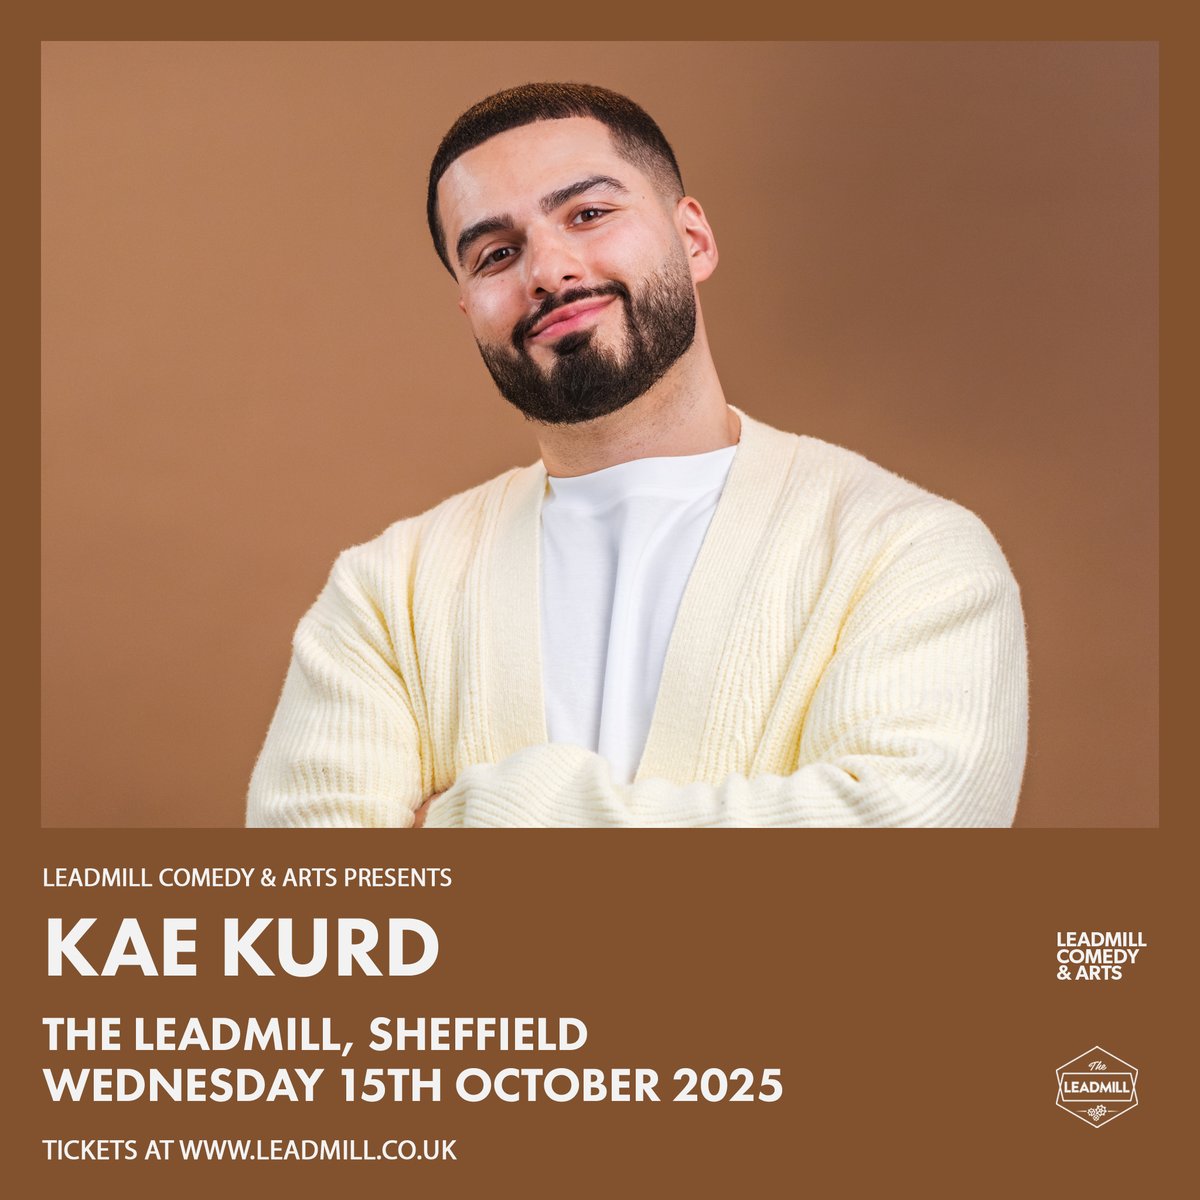 New Show Announcement 🚨 @KaeKurd returns to The Leadmill next October to perform his hysterical brand new show 'What’s O’Kurd?' Tickets on sale right now from: leadmill.co.uk/event/kae-kurd…